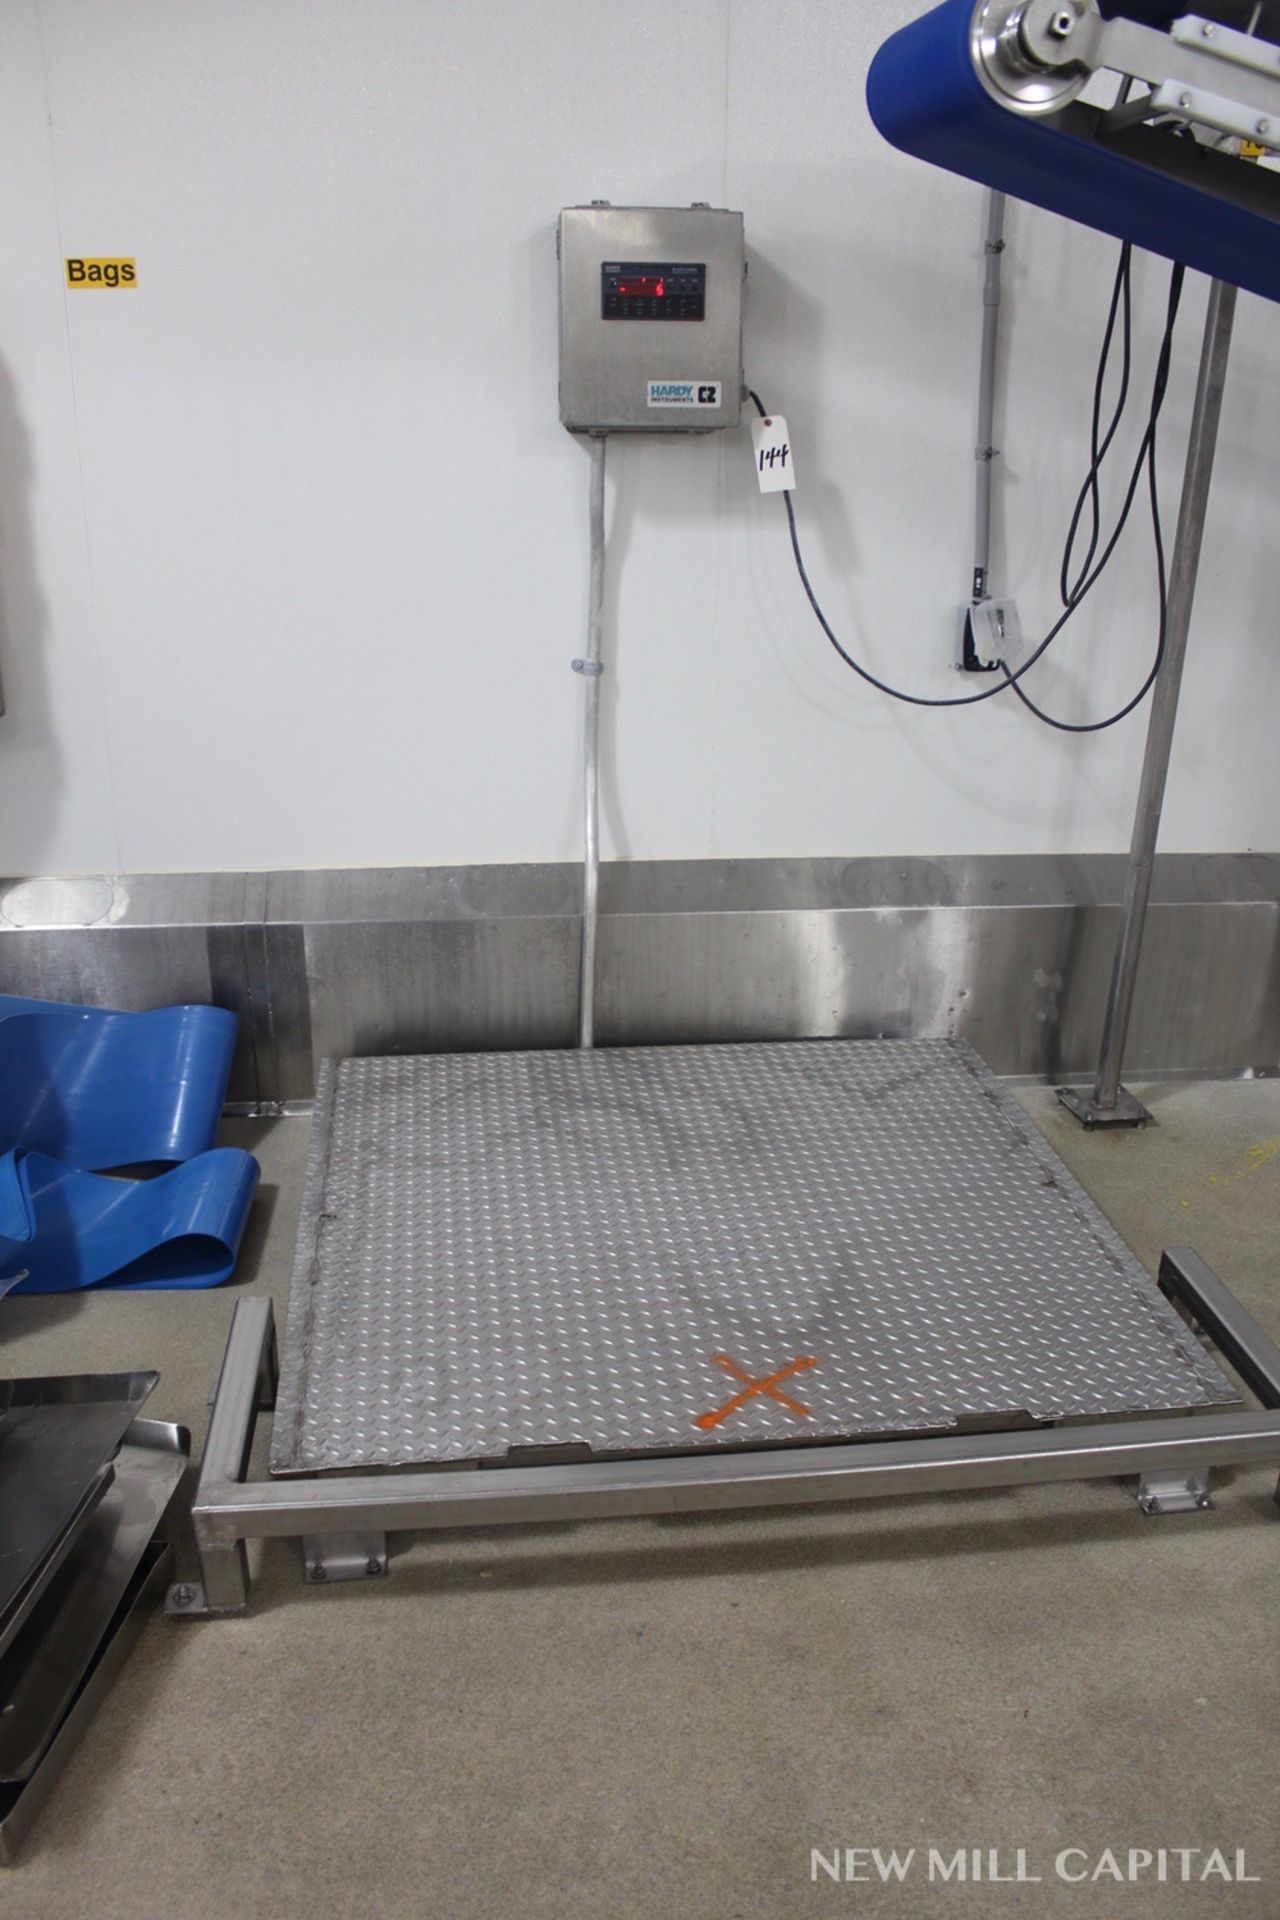 48" X 48" Stainless Steel Platform Scale, W/ Remote Read-Out | Rigging Fee: $150